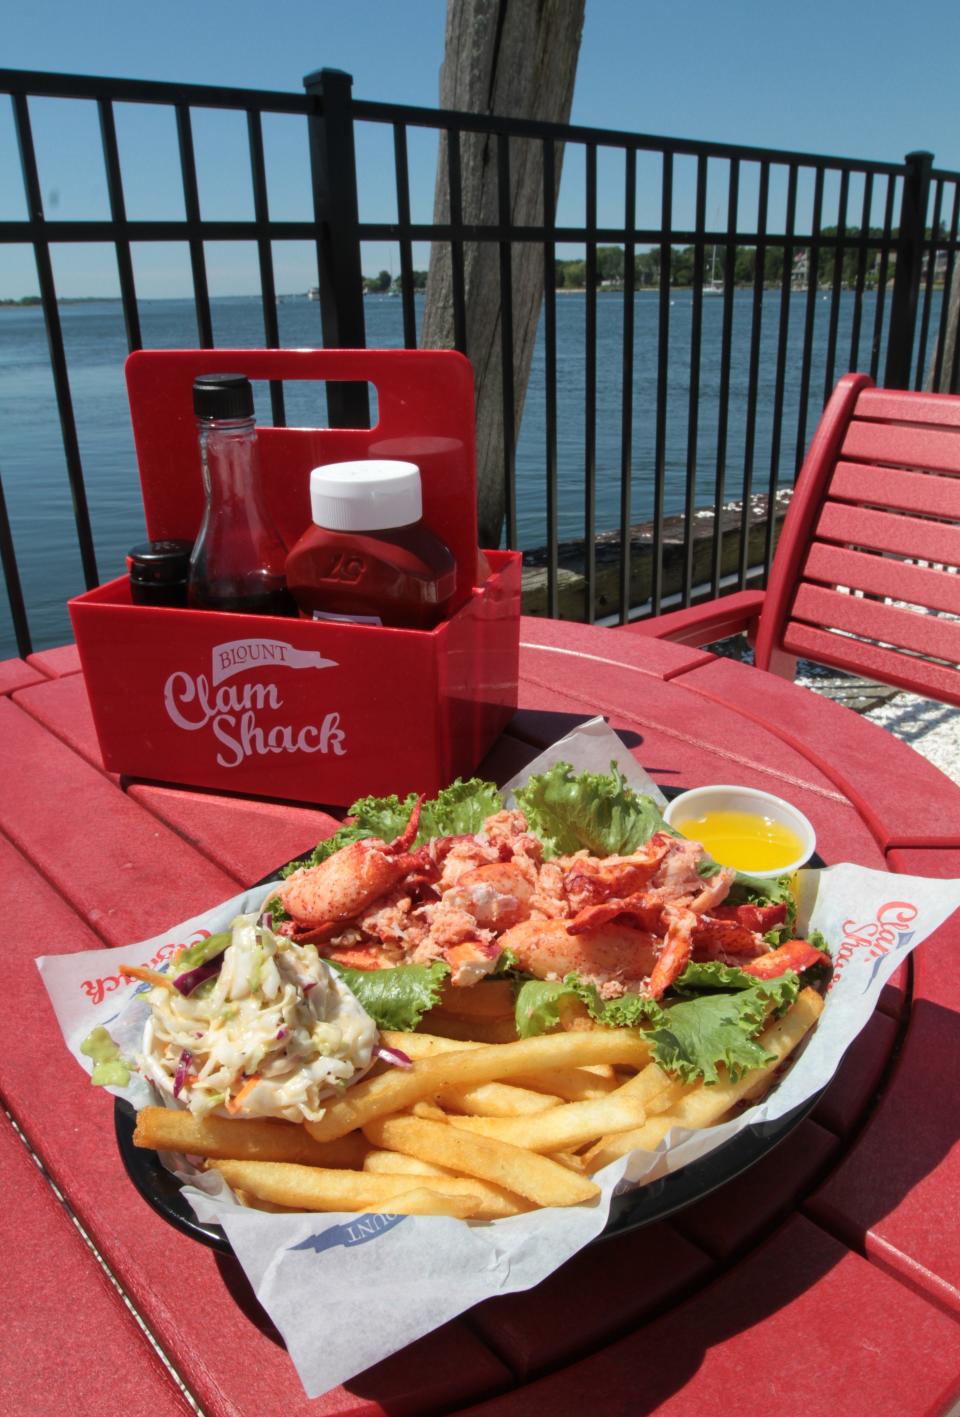 Blount Clam Shack on the Waterfront in Warren is one of many great dining spots to enjoy on Water Street.